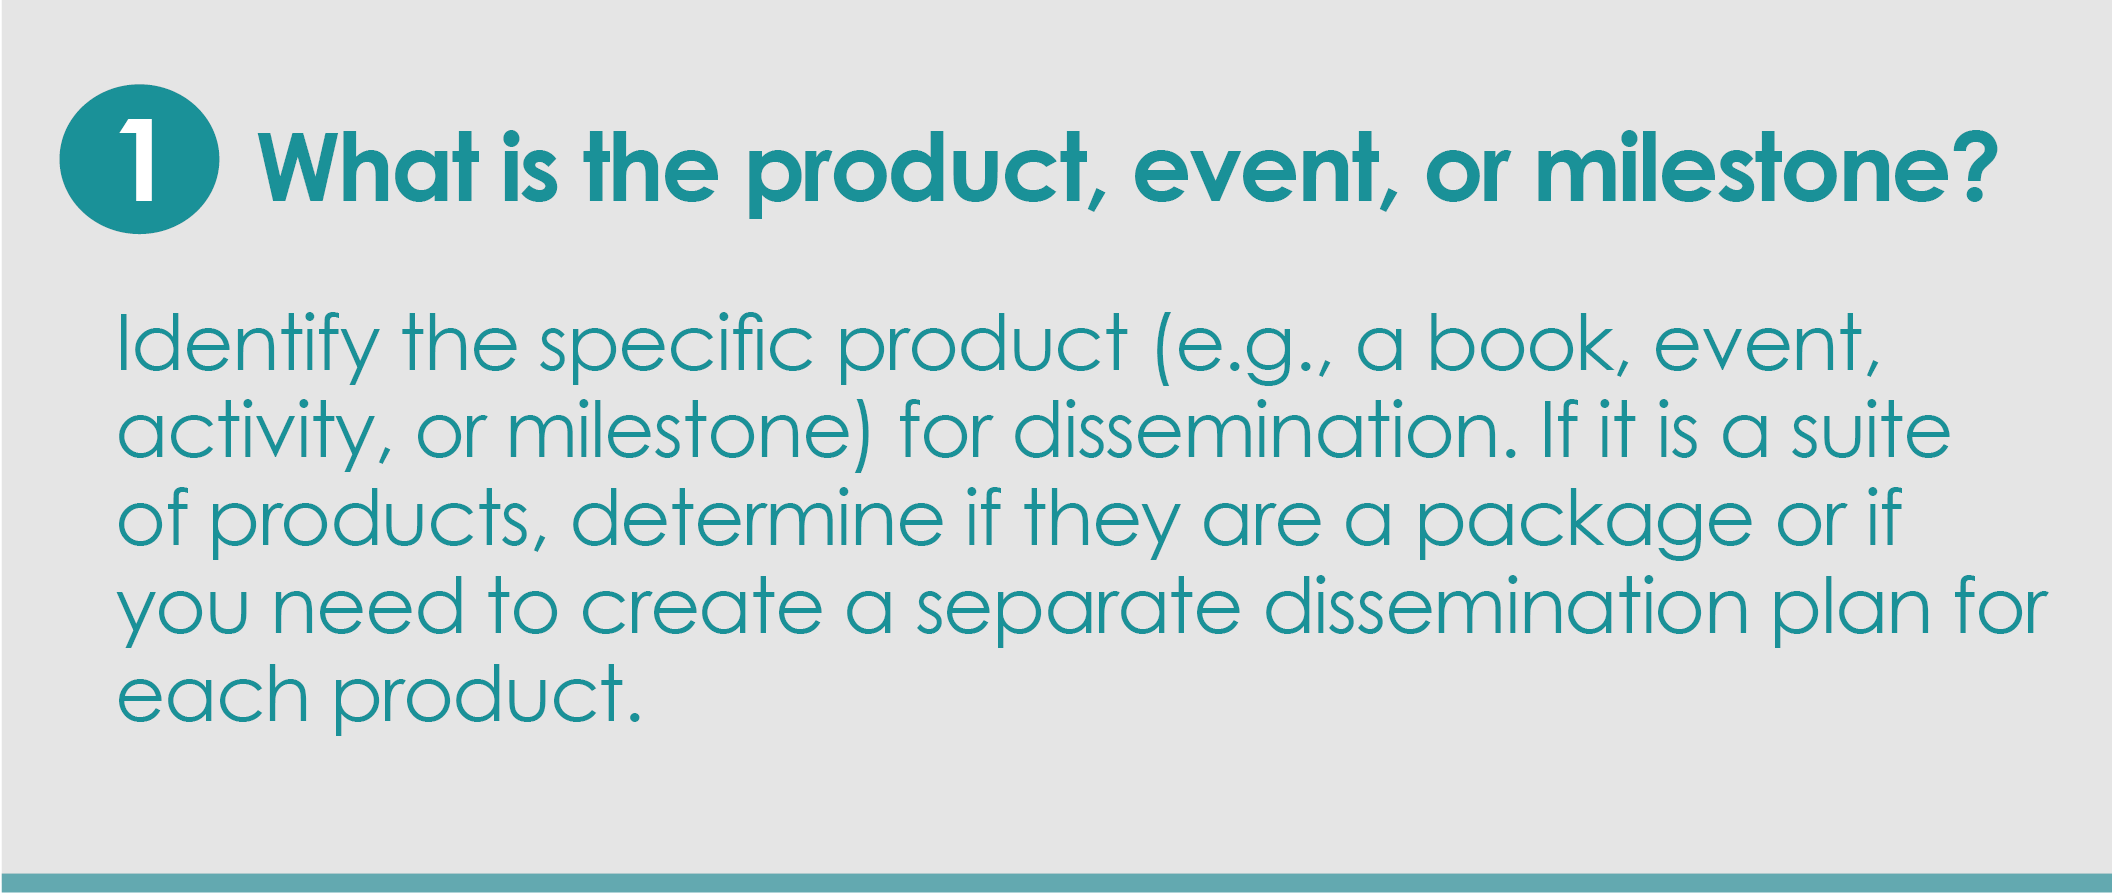 Step 1: What is the product, event, or milestone? Identify the specific product (e.g., a book, event, activity, or milestone) you are focusing on. If it is a suite of products, determine if they are a package or if you need to create a separate dissemination plan for each product.